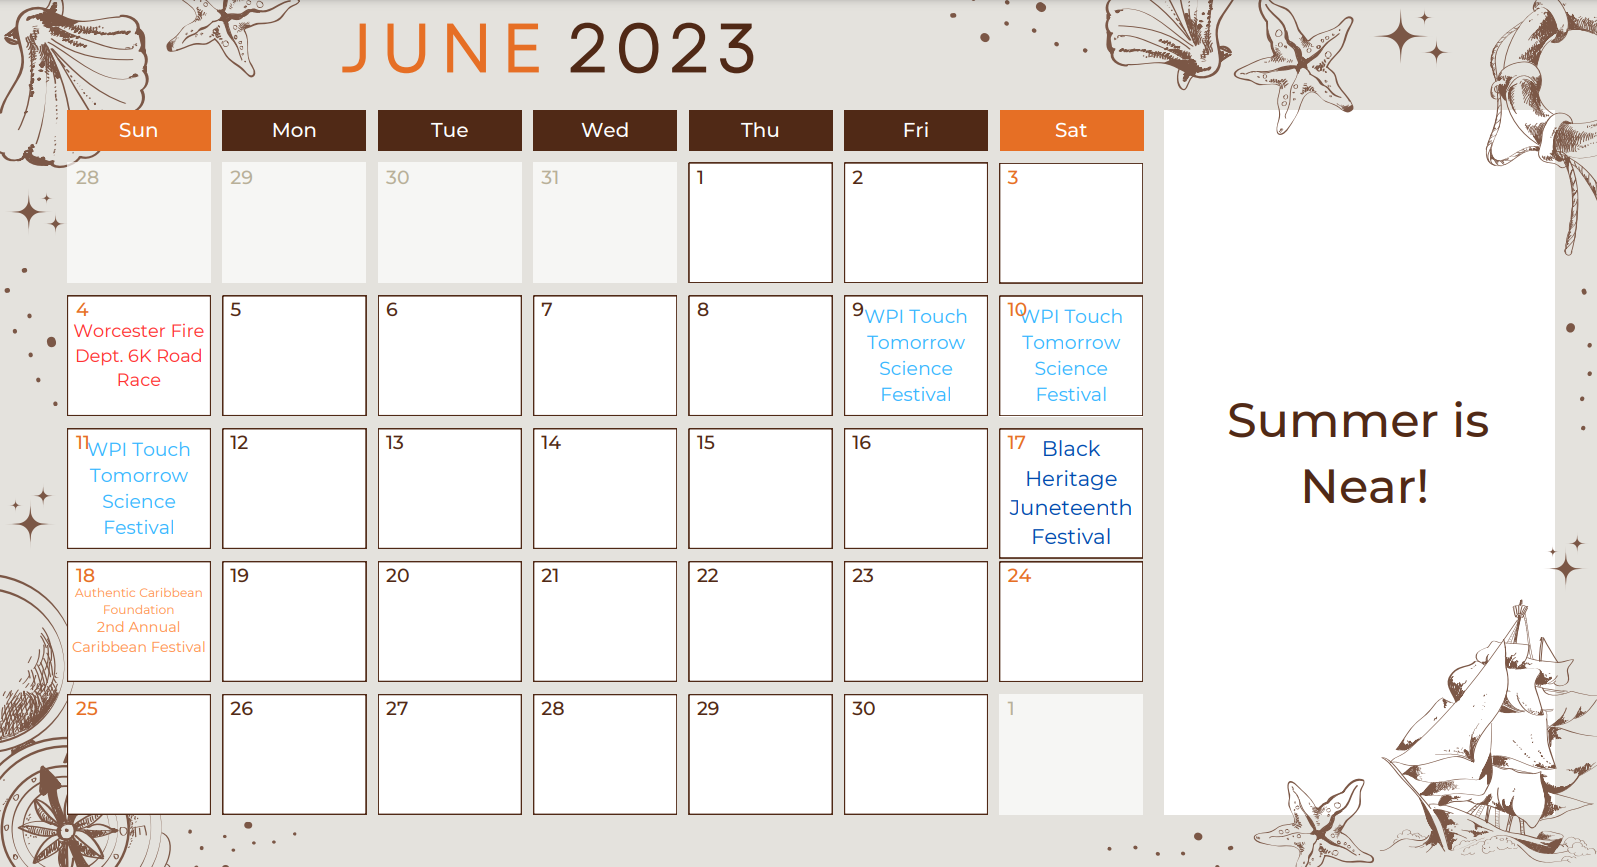 Events in Institute Park in the month of June 2023